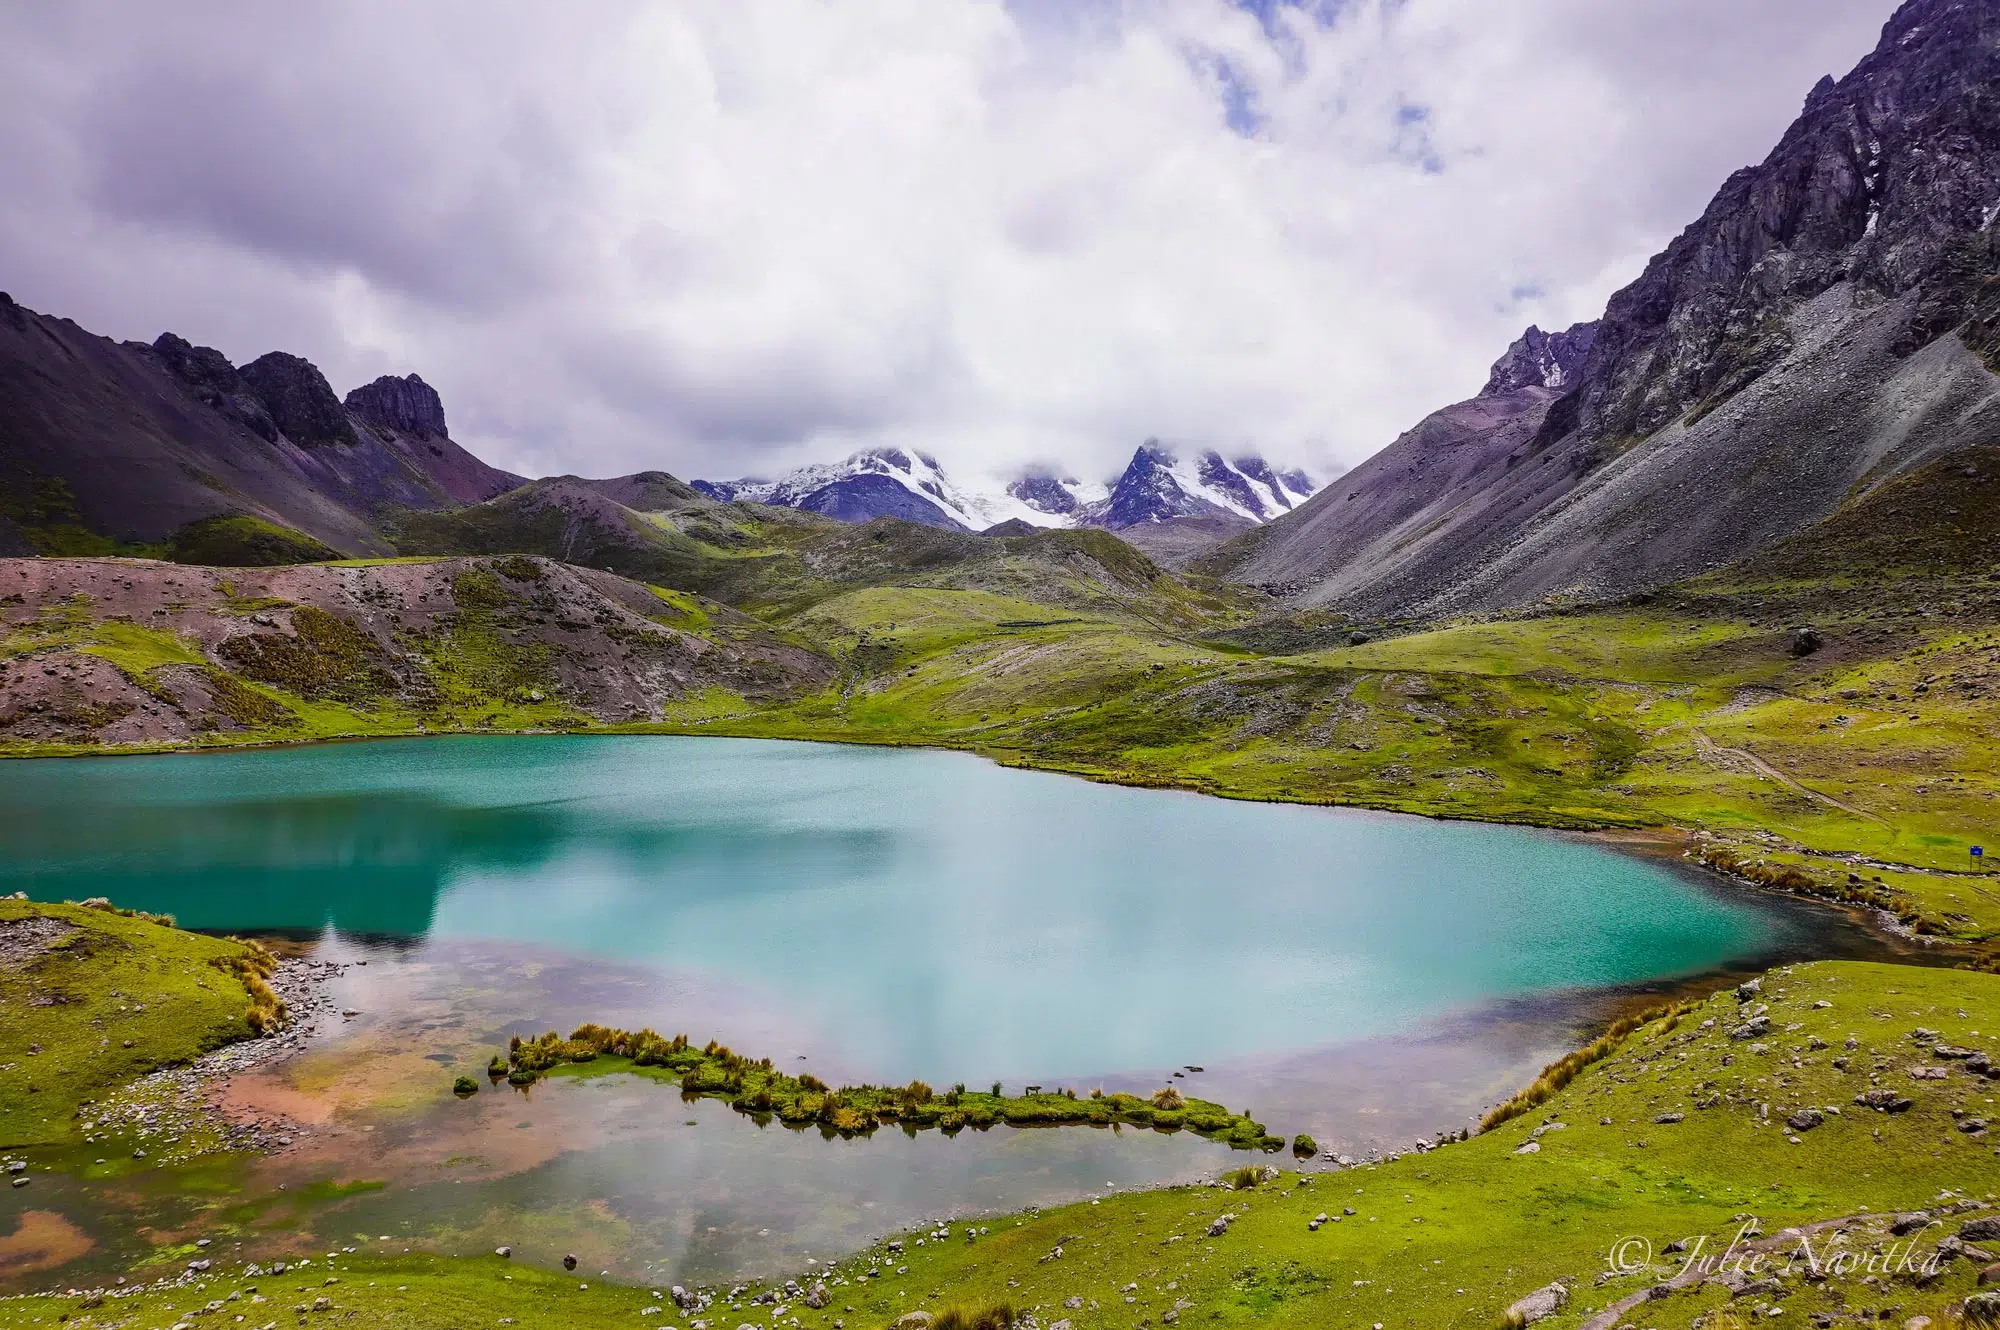 Image of a turquoise lake surrounding by lush vibrant green grasses and towering mountains near Cusco, Peru.